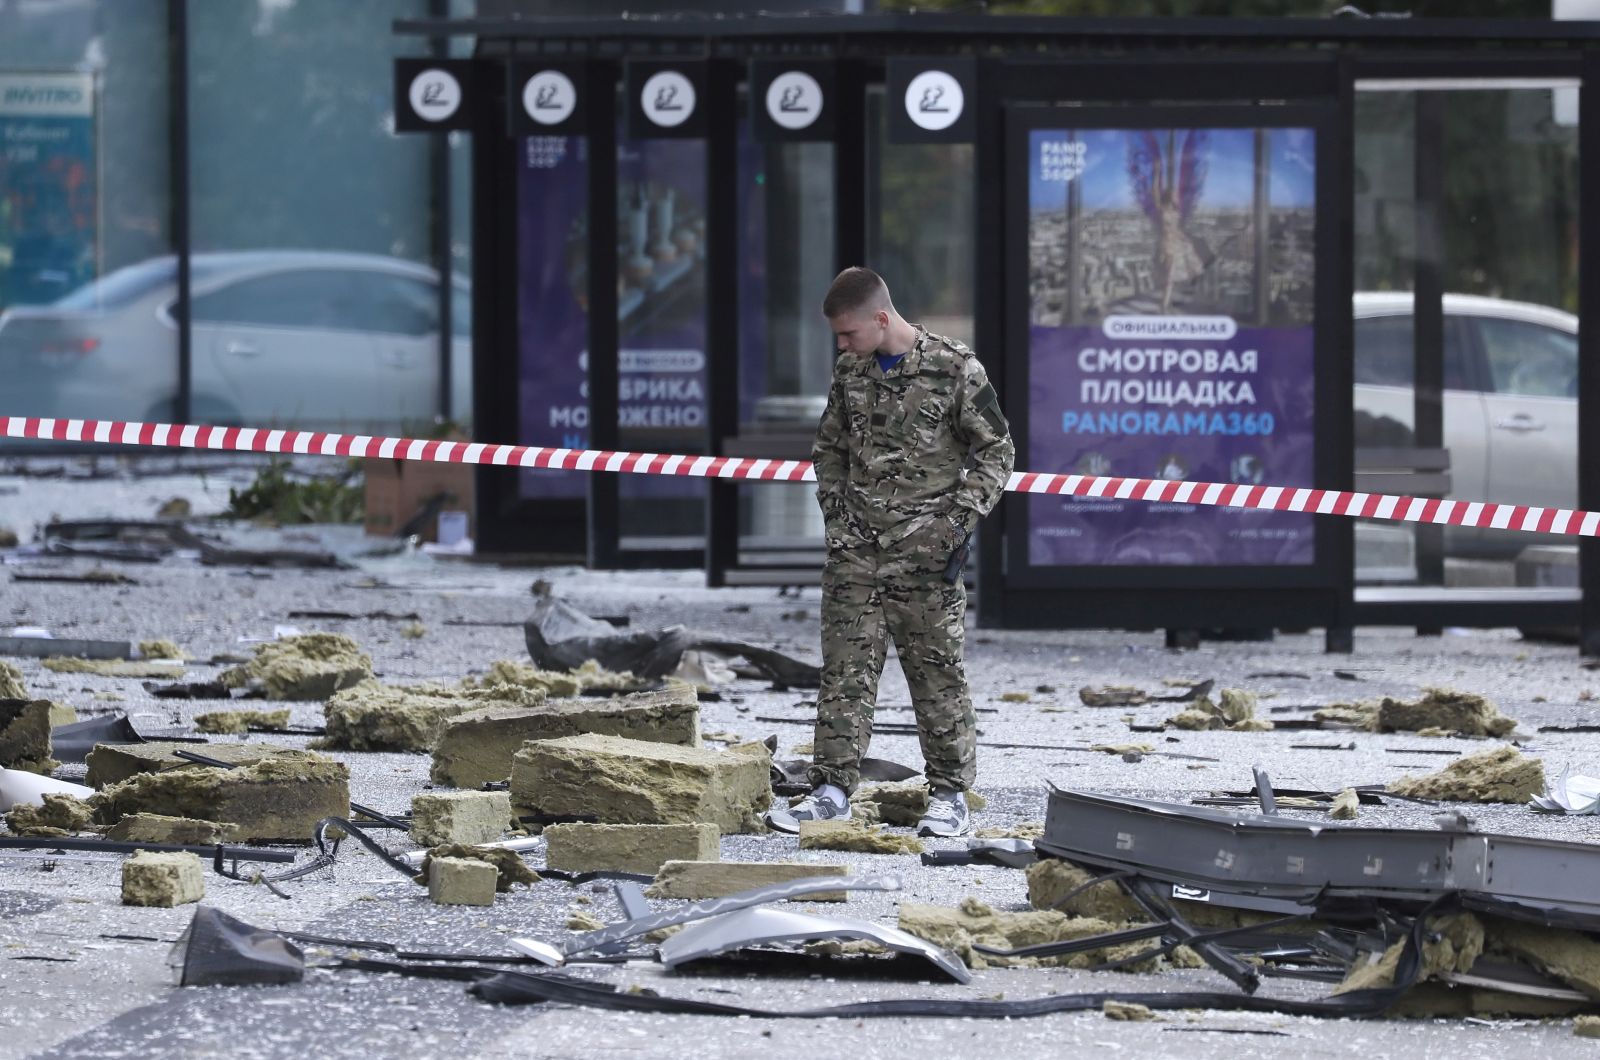 epa10776546 An official inspects debris at the site of a damaged building in the Moscow-City business center following a reported drone attack in Moscow, Russia, 30 July 2023. The Russian Ministry of Defense on 30 July accused Ukraine of carrying out an attack with three unmanned aerial vehicles (UAV) against facilities in Moscow, adding that the attack was foiled and the three UAVs 'were suppressed by means of electronic warfare and crashed' leaving no casualties.  EPA/YURI KOCHETKOV